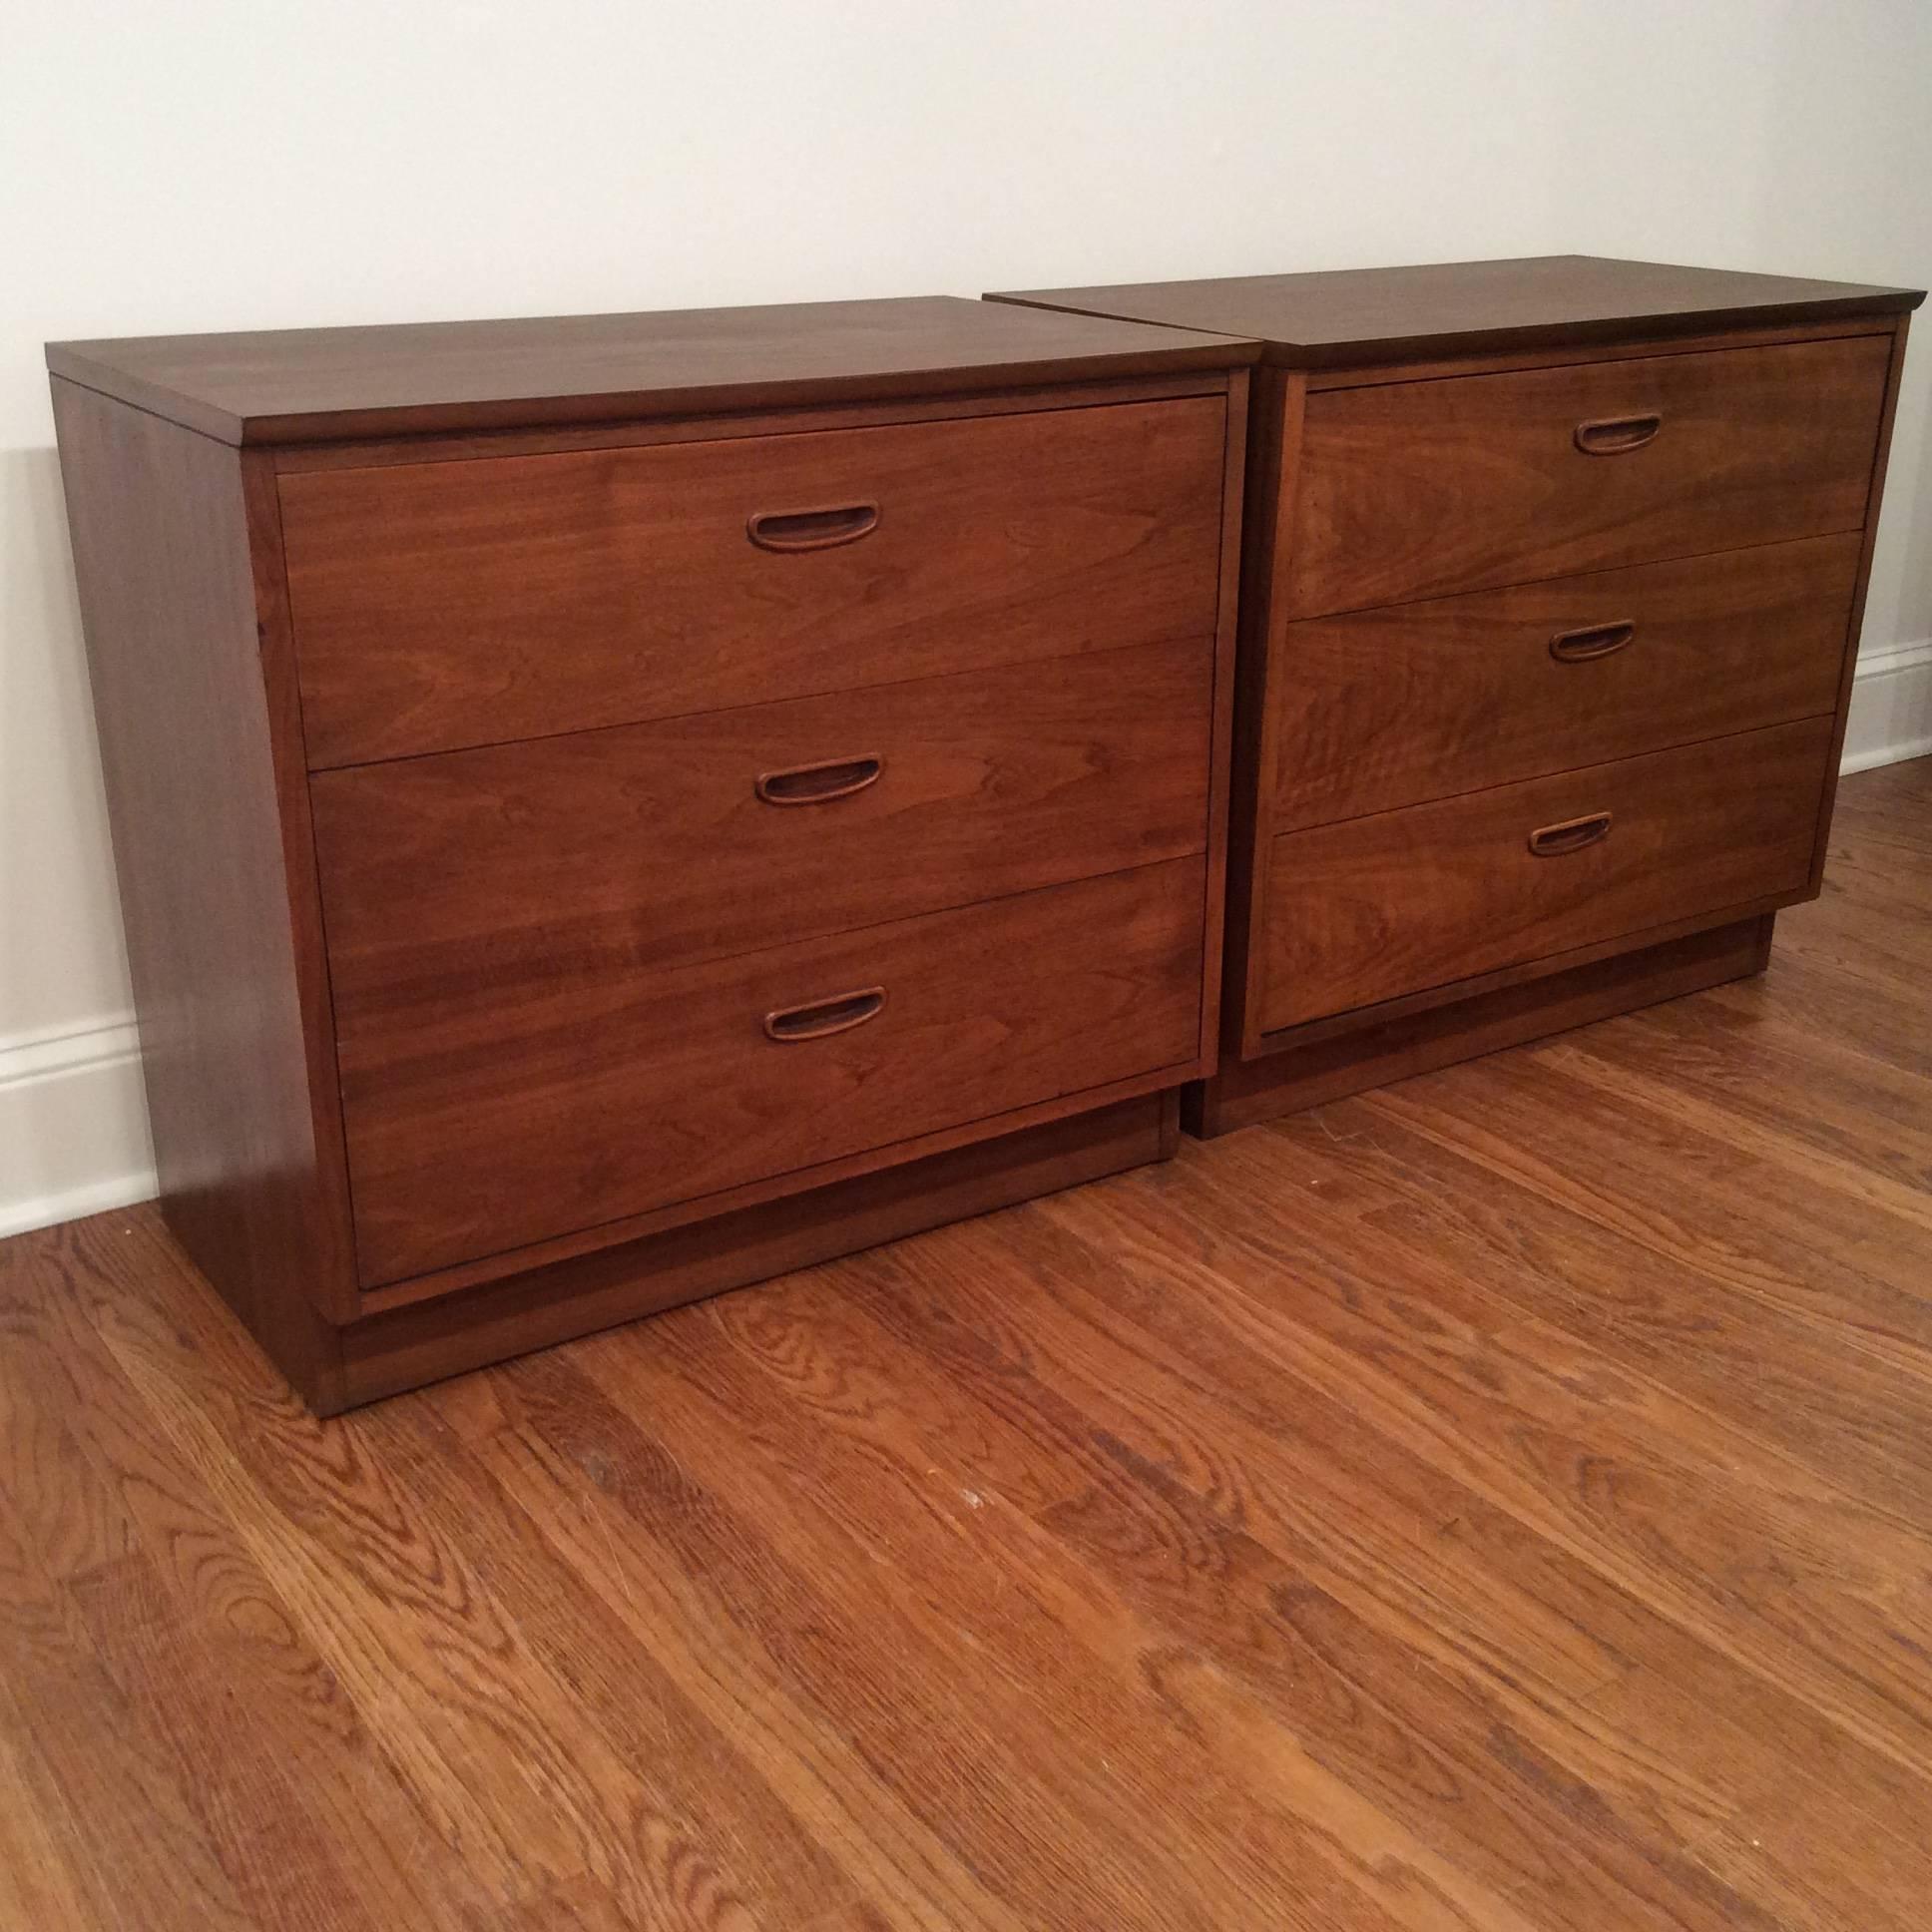 1960s Three-Drawer Dresser In Good Condition For Sale In Tarrytown, NY